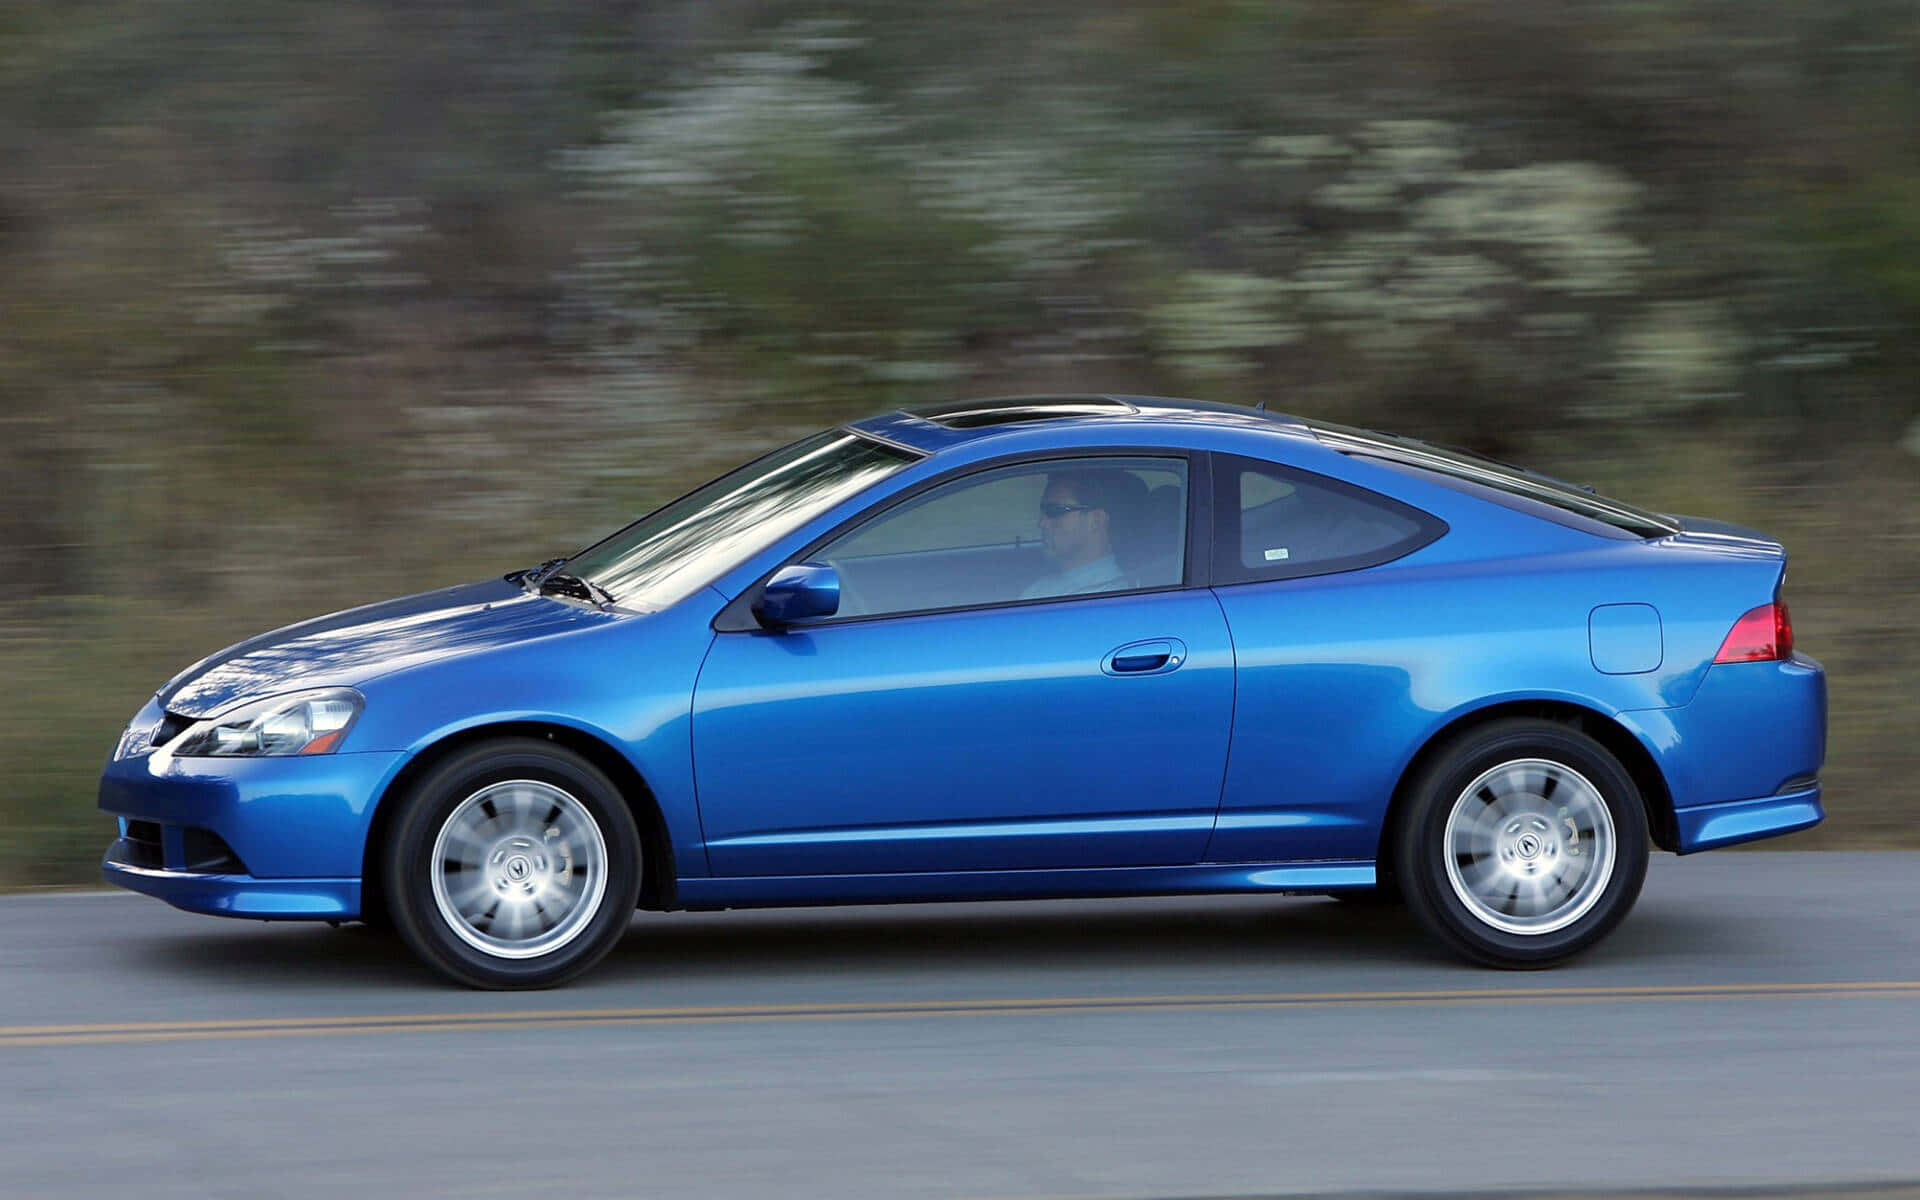 Acura RSX: Performance meets luxury on the road Wallpaper